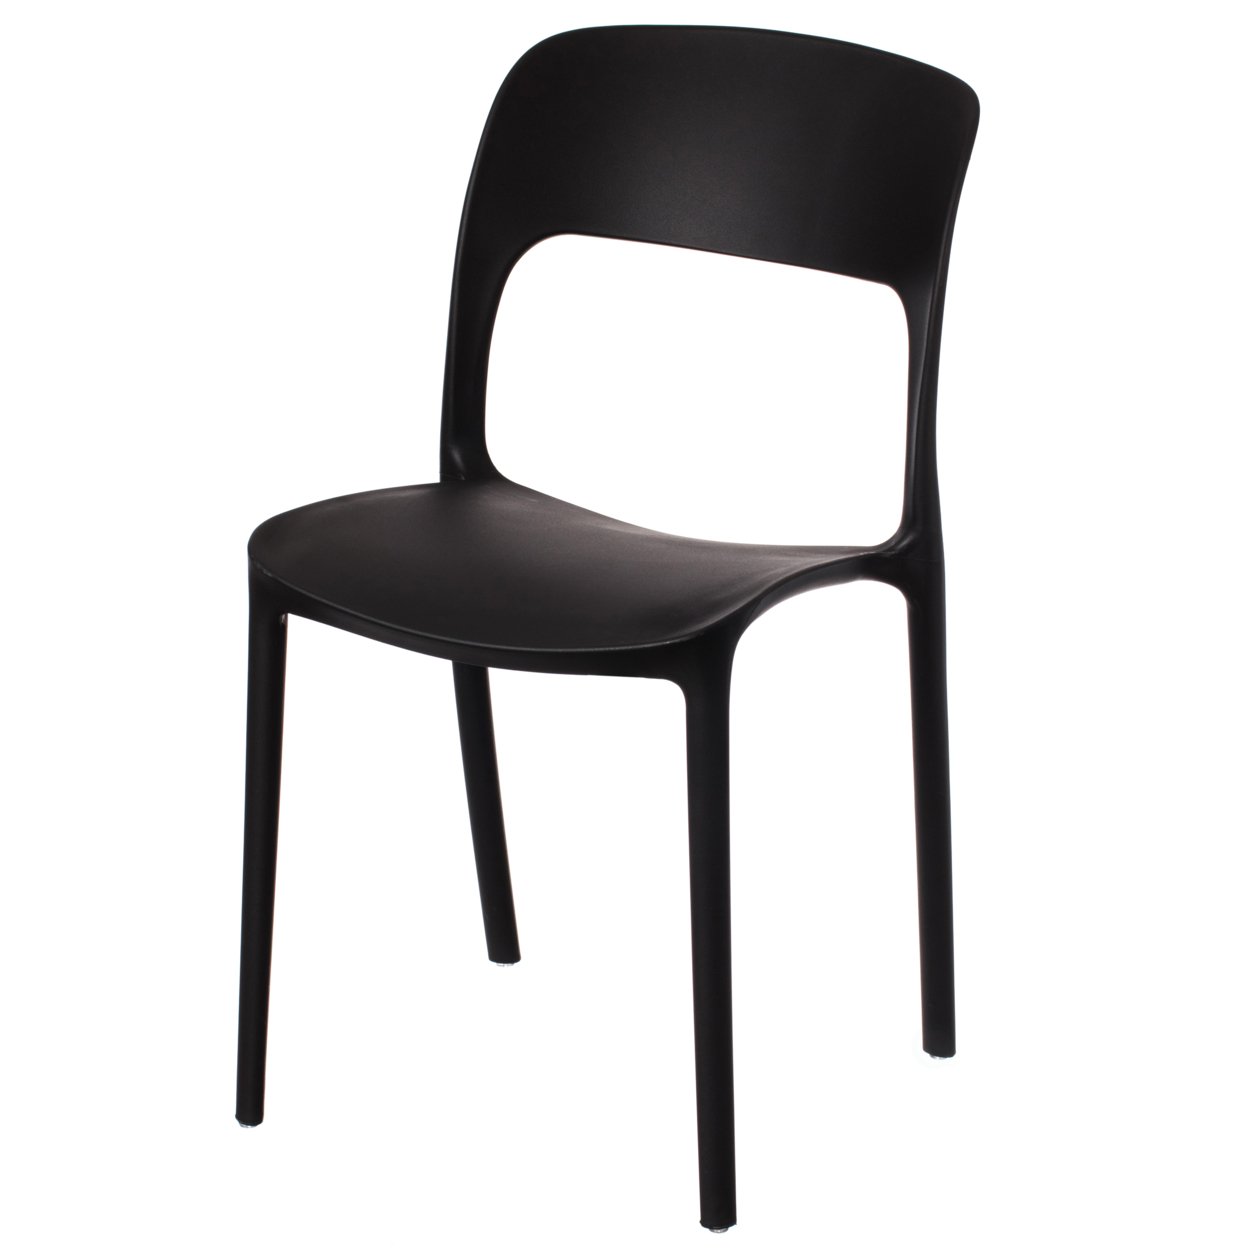 Modern Plastic Outdoor Dining Chair With Open Curved Back - Single Blue